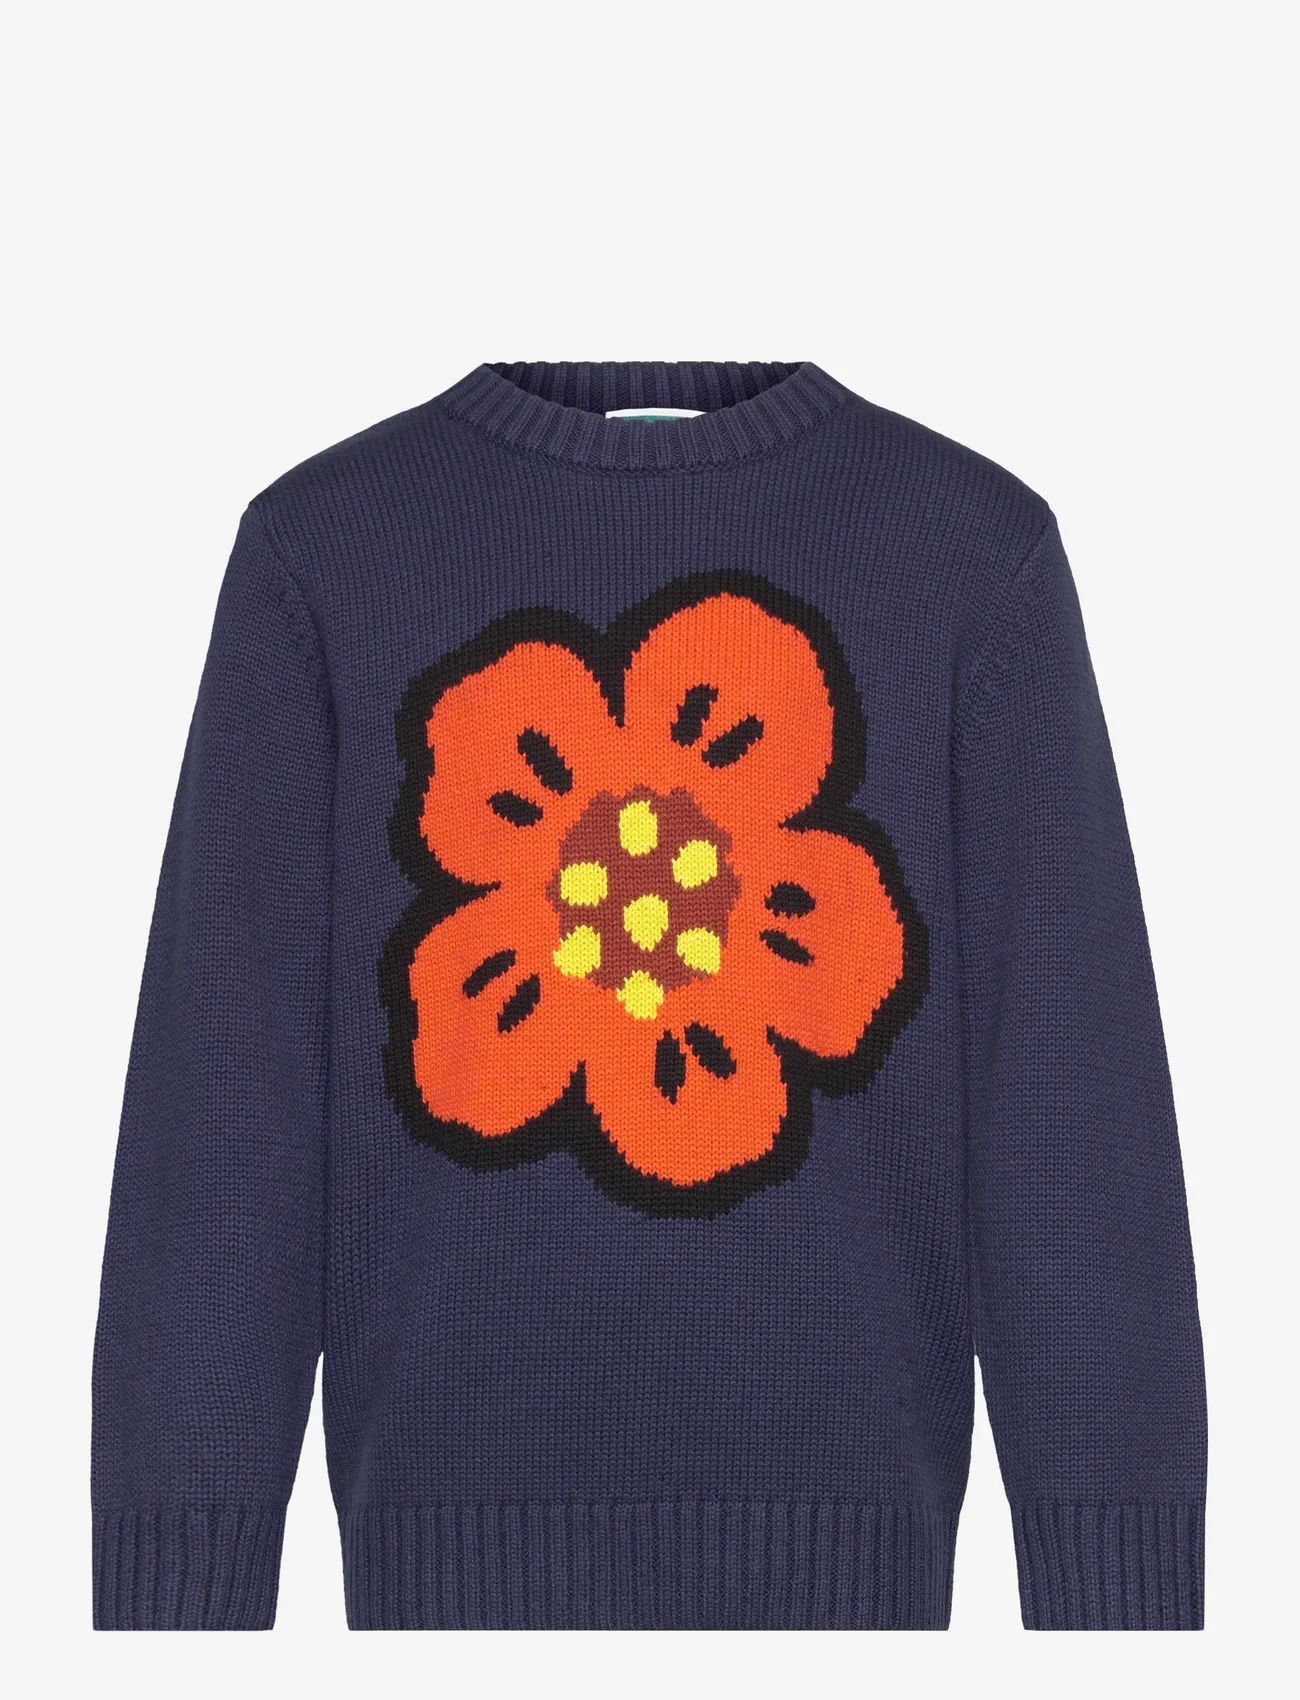 Kenzo - PULLOVER - swetry - navy - 0